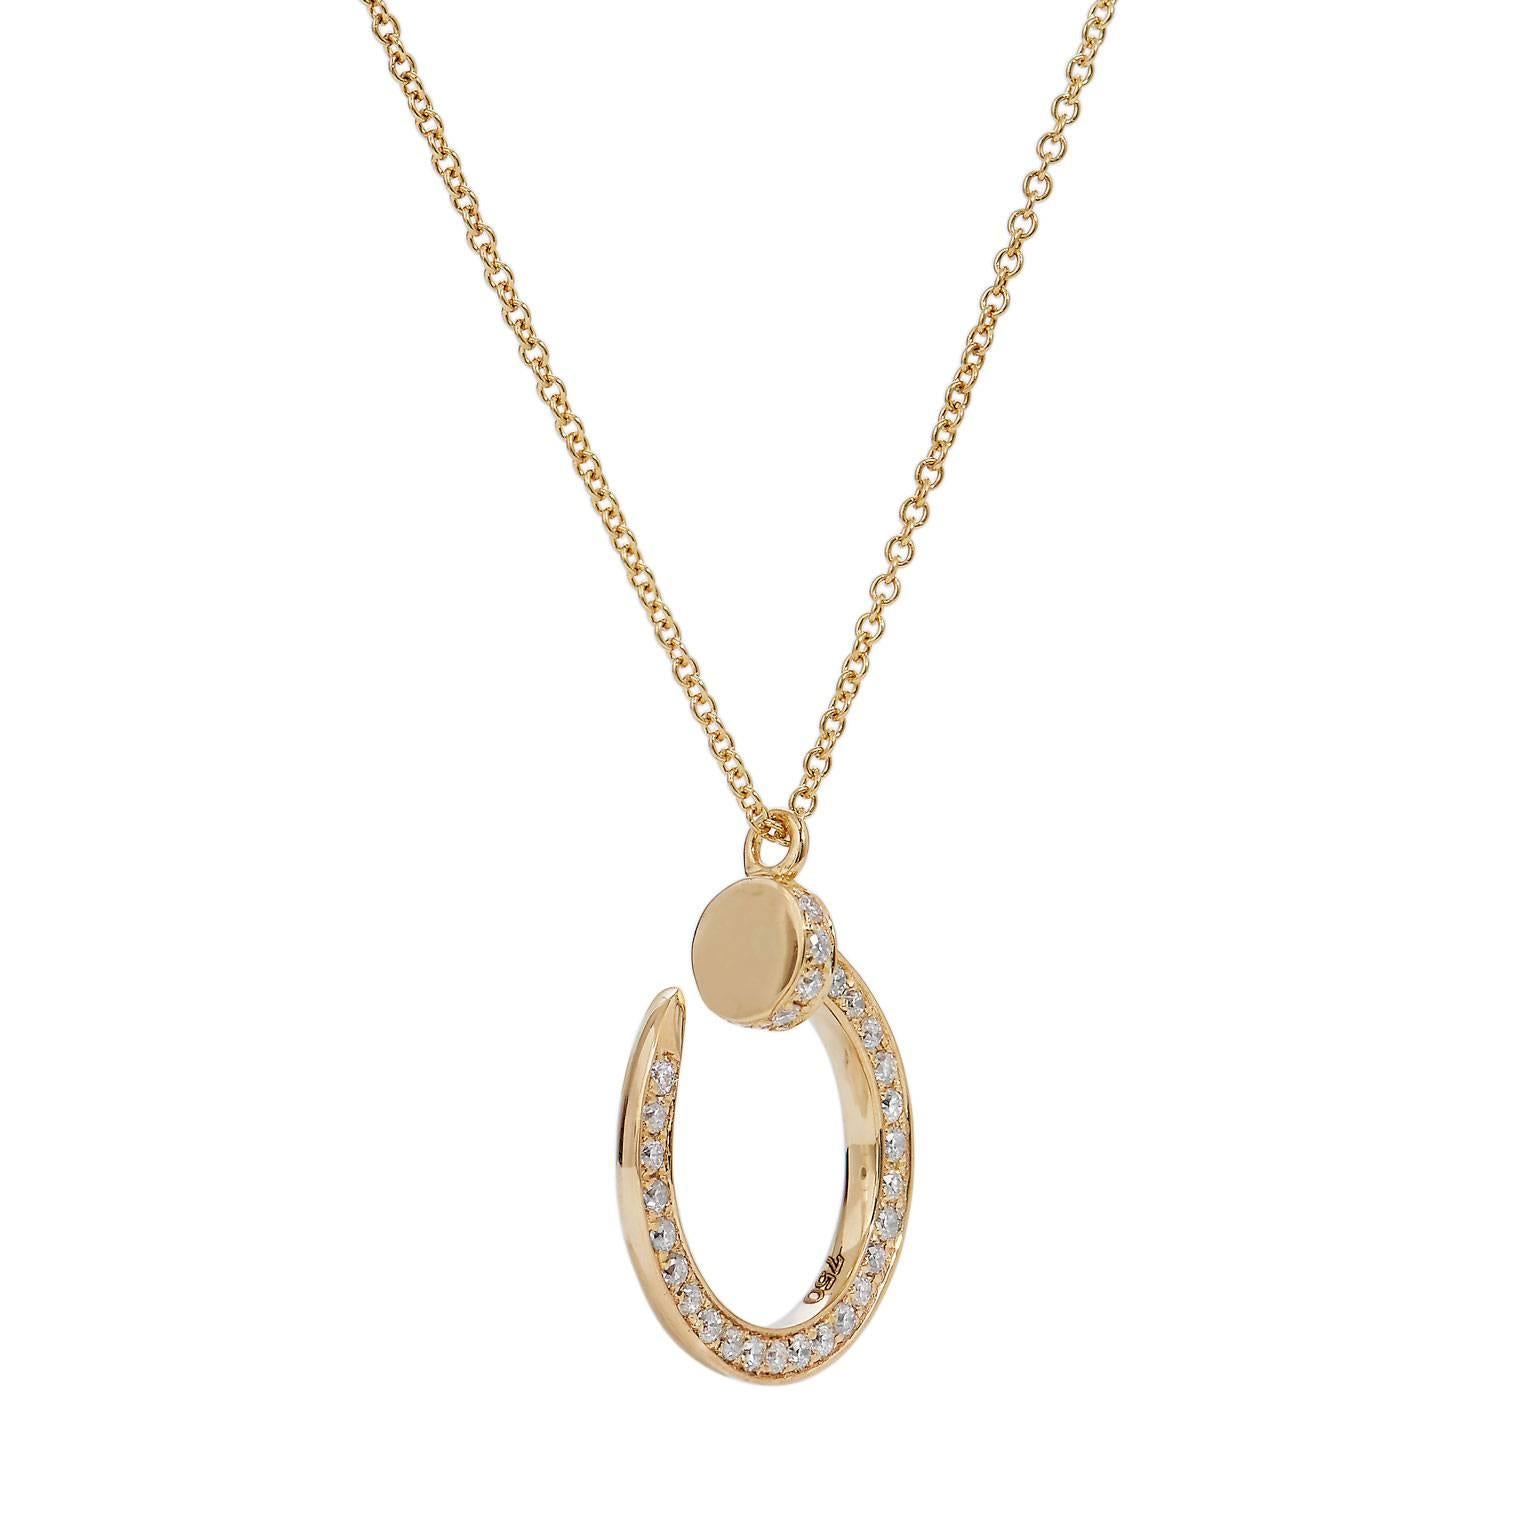 0.25 carat of pave-set diamond (G/H/VS), are affixed in a 16 millimeter curved nail design. Fashioned in 18 karat yellow gold and suspended from a white gold chain, this pendant necklace makes a tasteful statement.